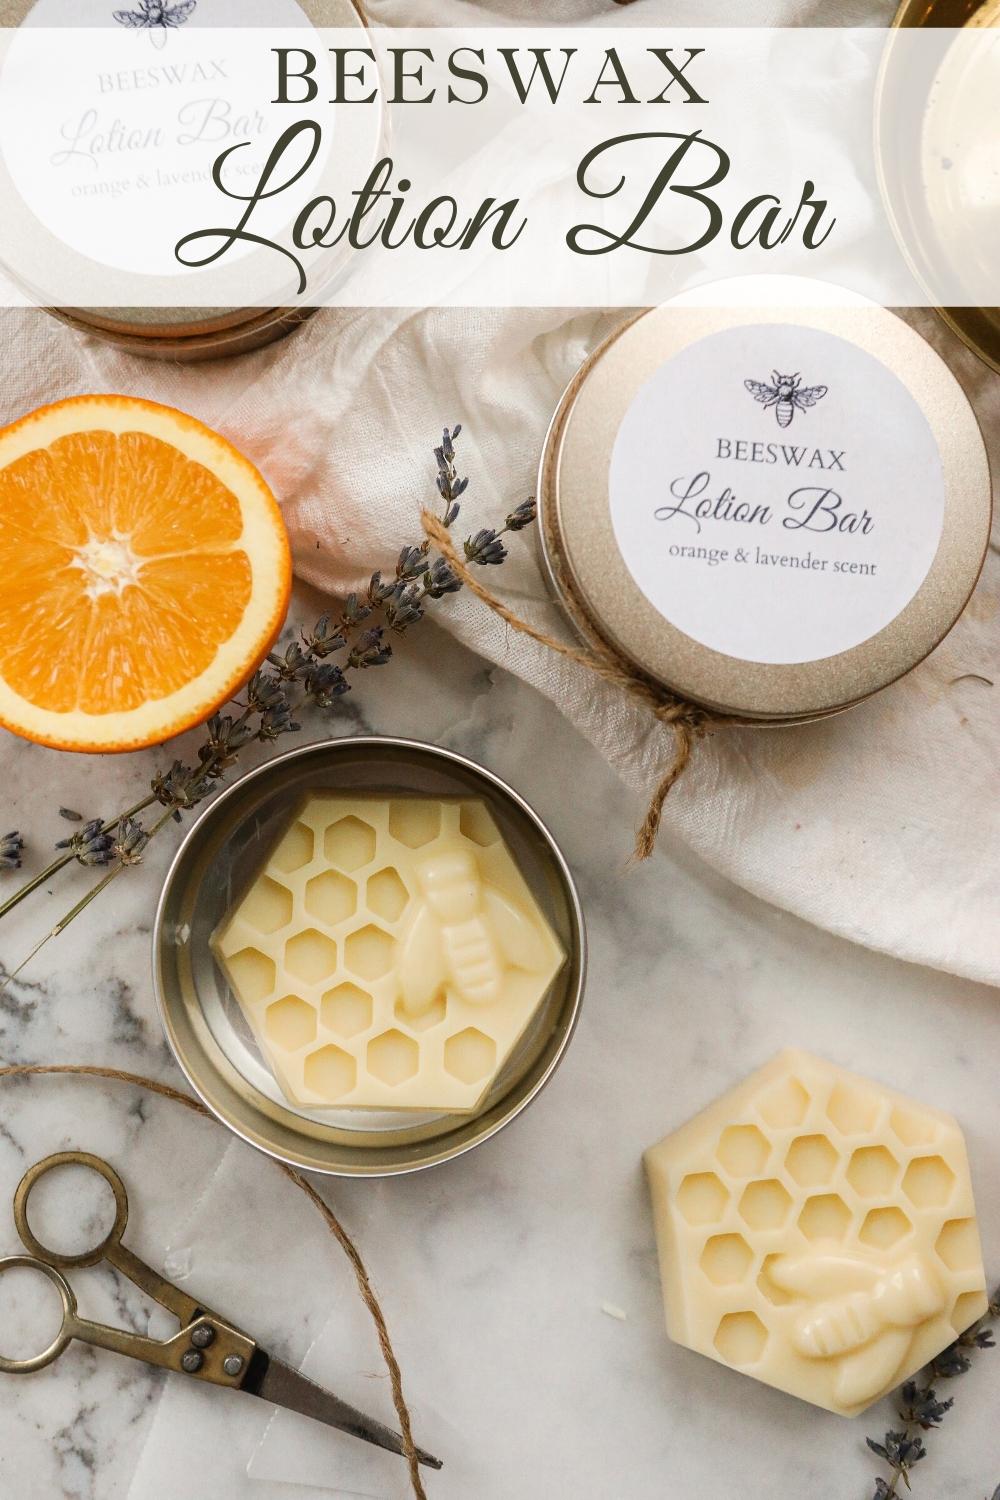 Recipe for lotion bars - Beeswax lotion bar